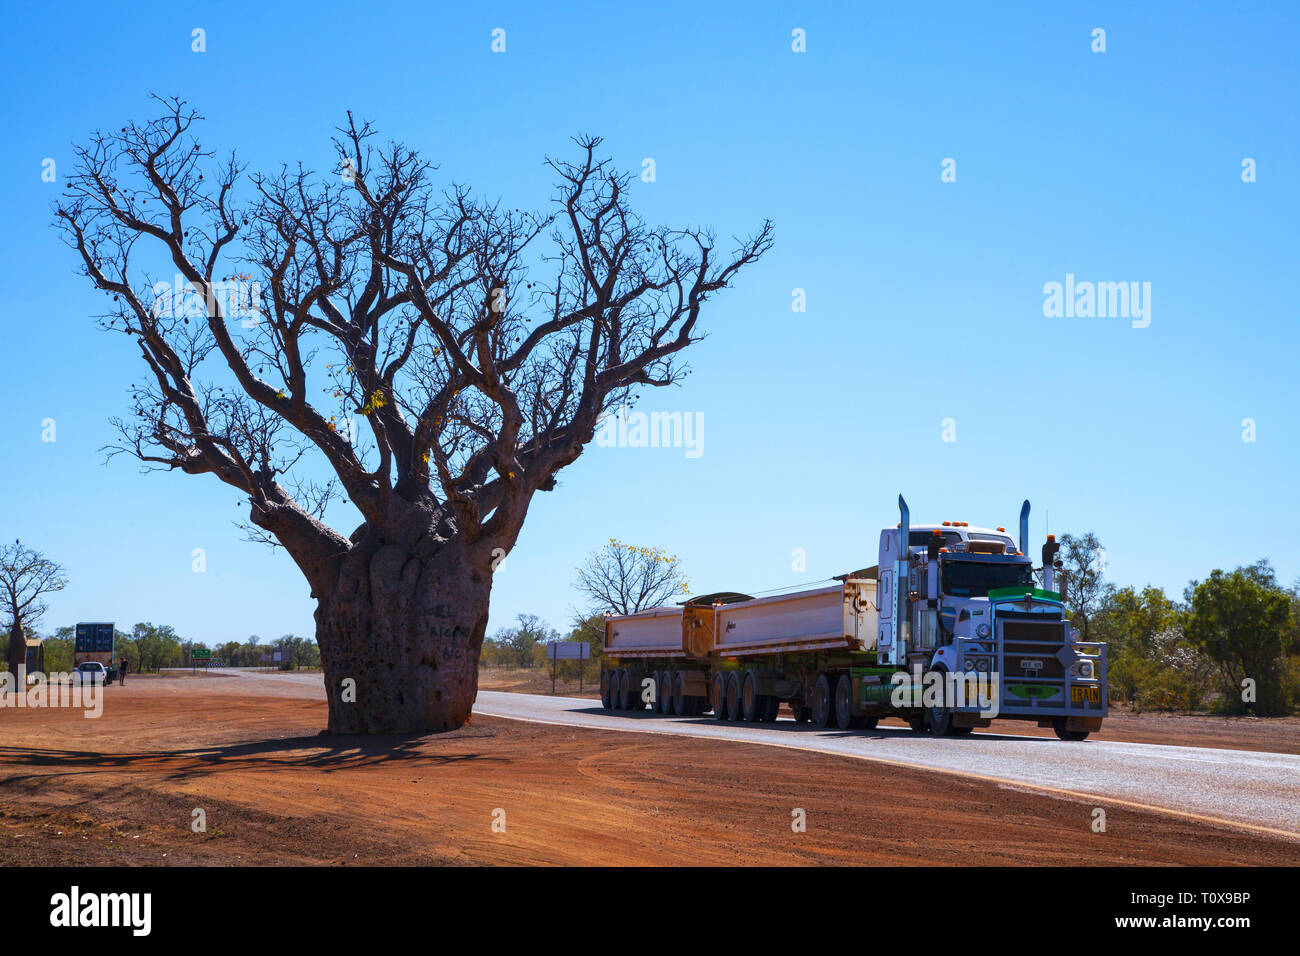 The Kimberley, Derby - July 2016: A road train rushes past the iconic Boab tree of the Kimberley. Stock Photo